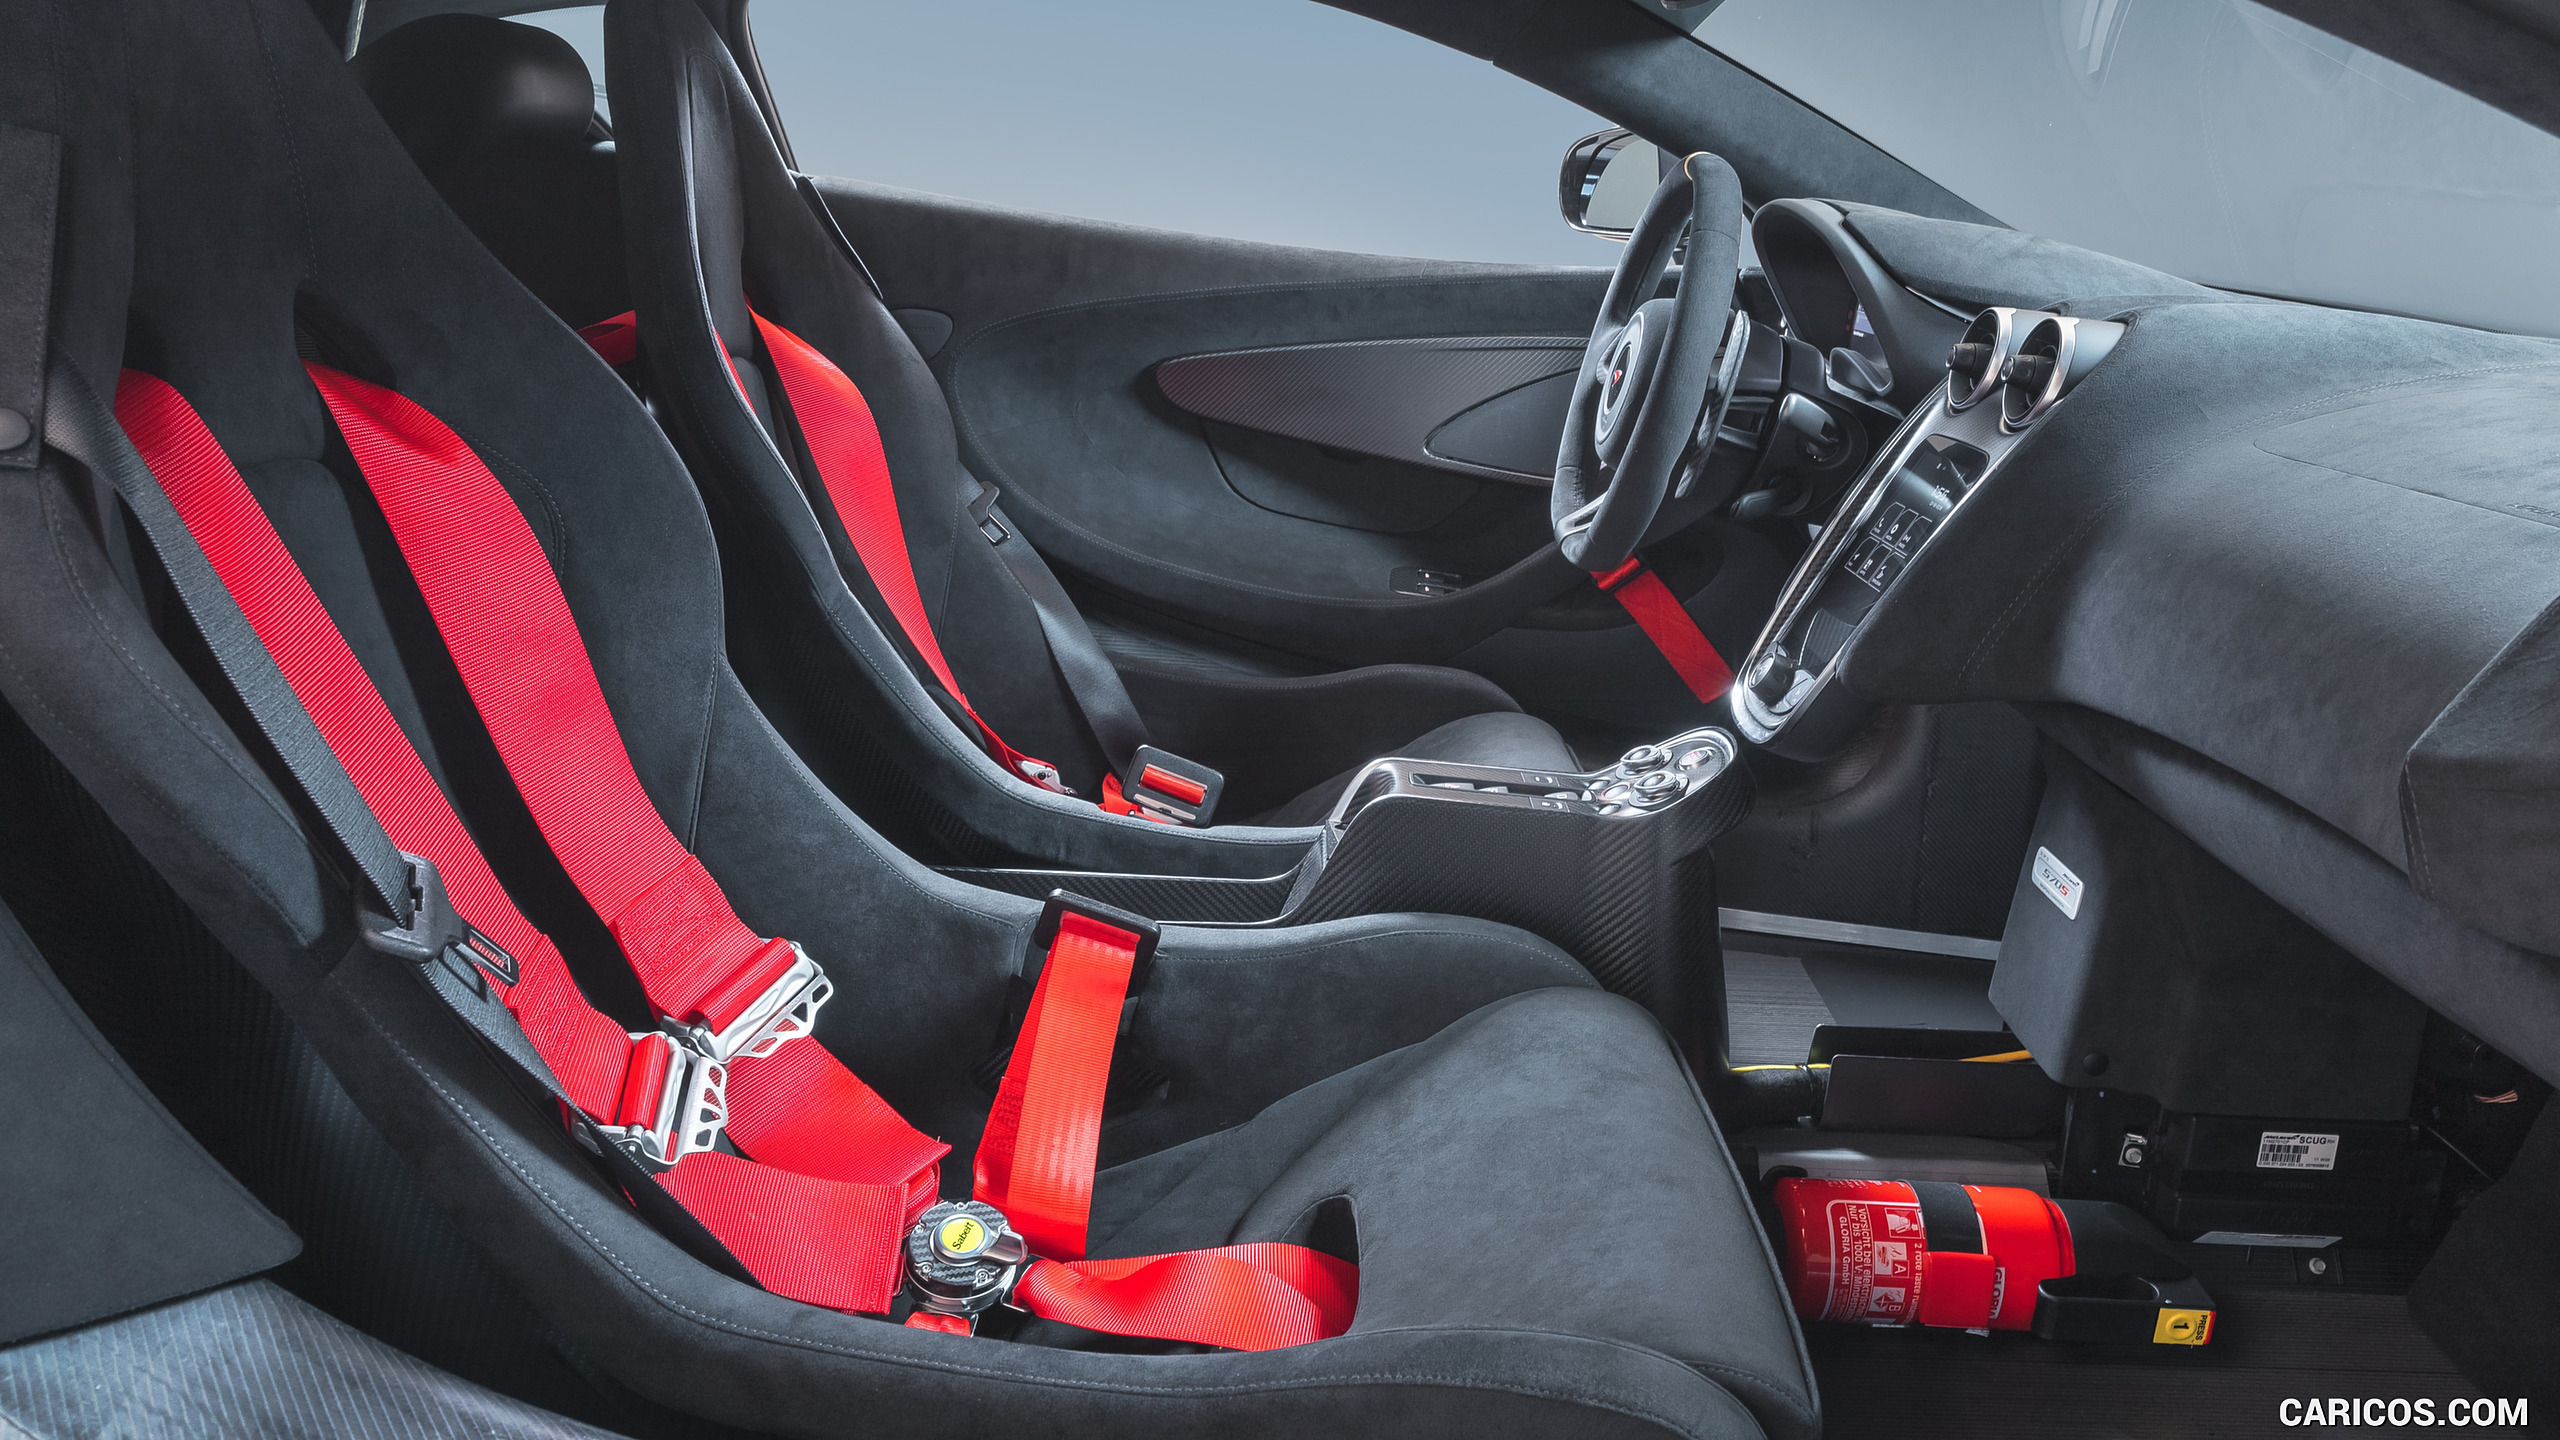 2018 McLaren 570S GT4 MSO X No. 8 White Red And Blue Accents - Interior, #9 of 22